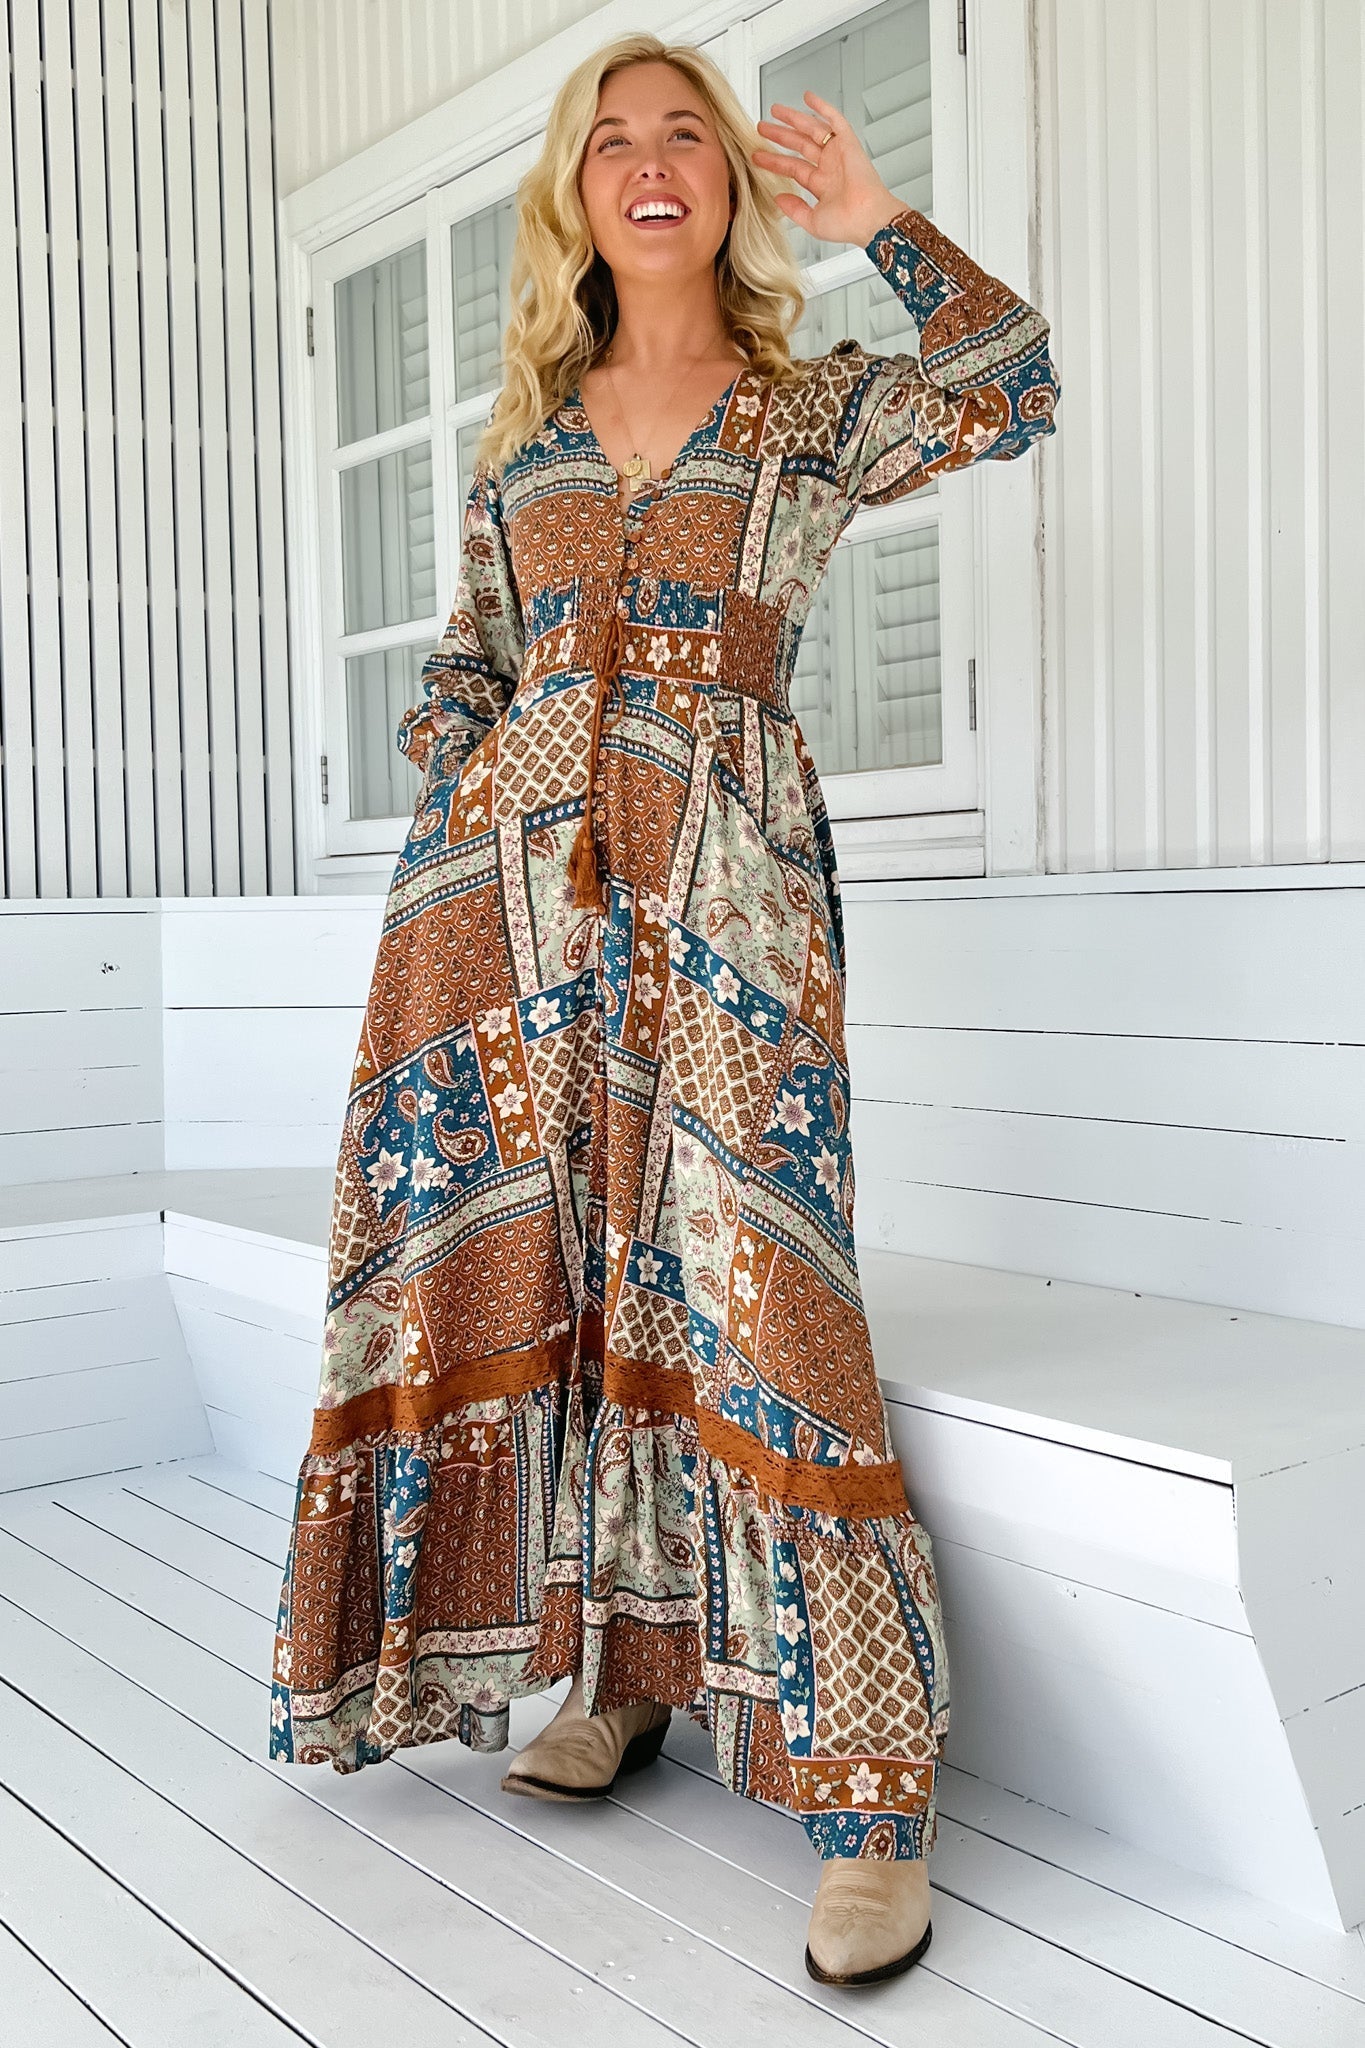 JAASE - Sabrina Maxi Dress: A Line Button Through Dress with Long Sleeves in Izabelle Print